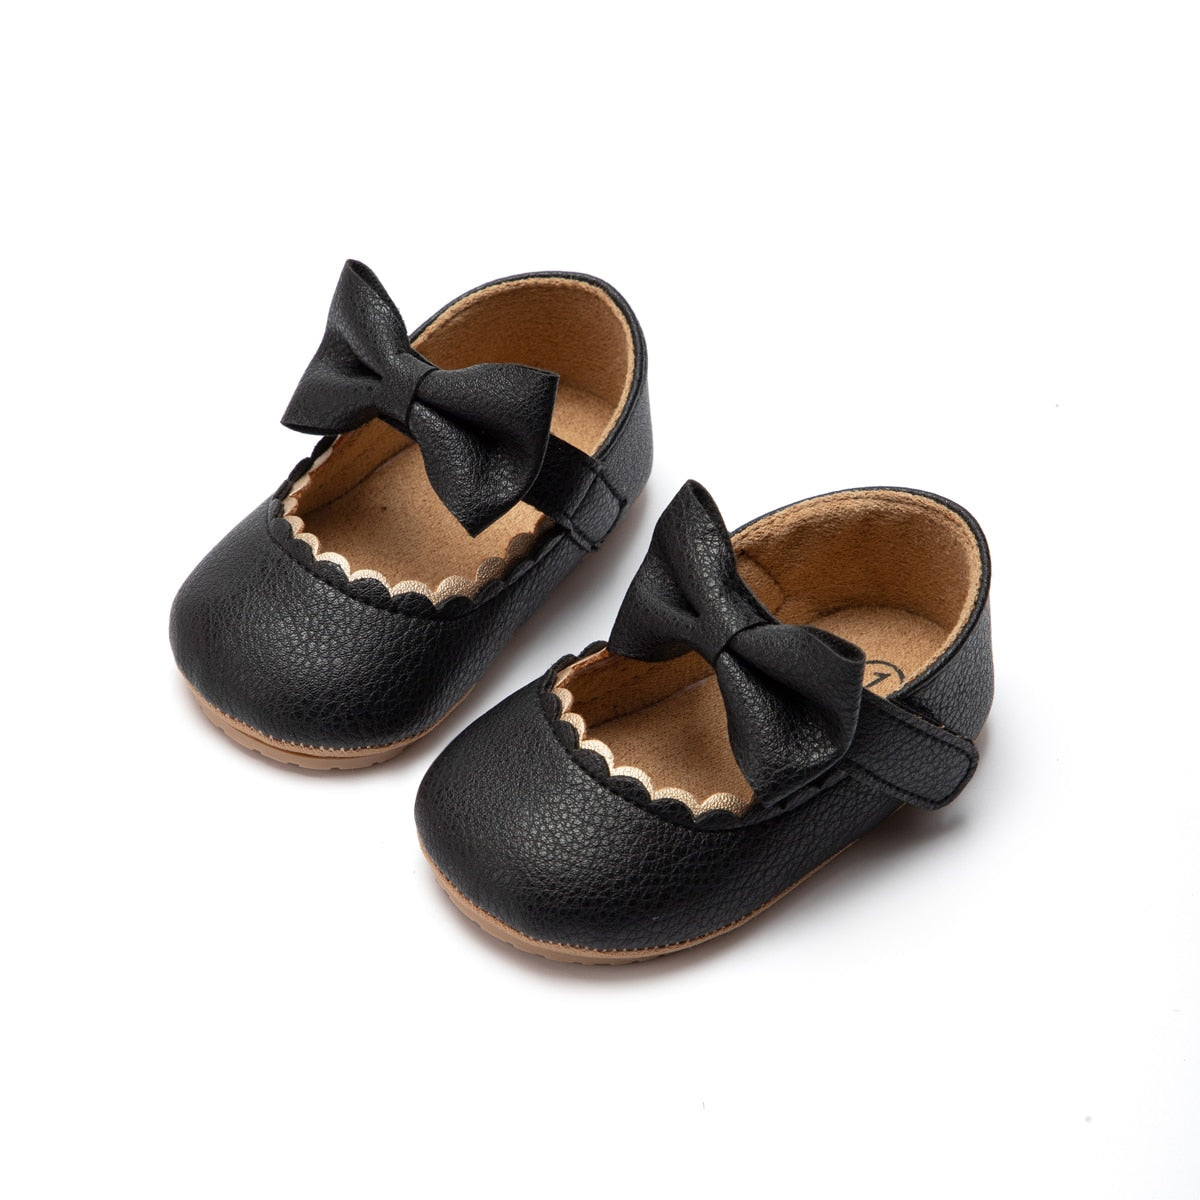 KIDSUN Baby Casual Shoes Infant Toddler Bowknot Non-slip Rubber Soft-Sole Flat PU First Walker Newborn Bow Decor Mary Janes - Rocket Family Shopping